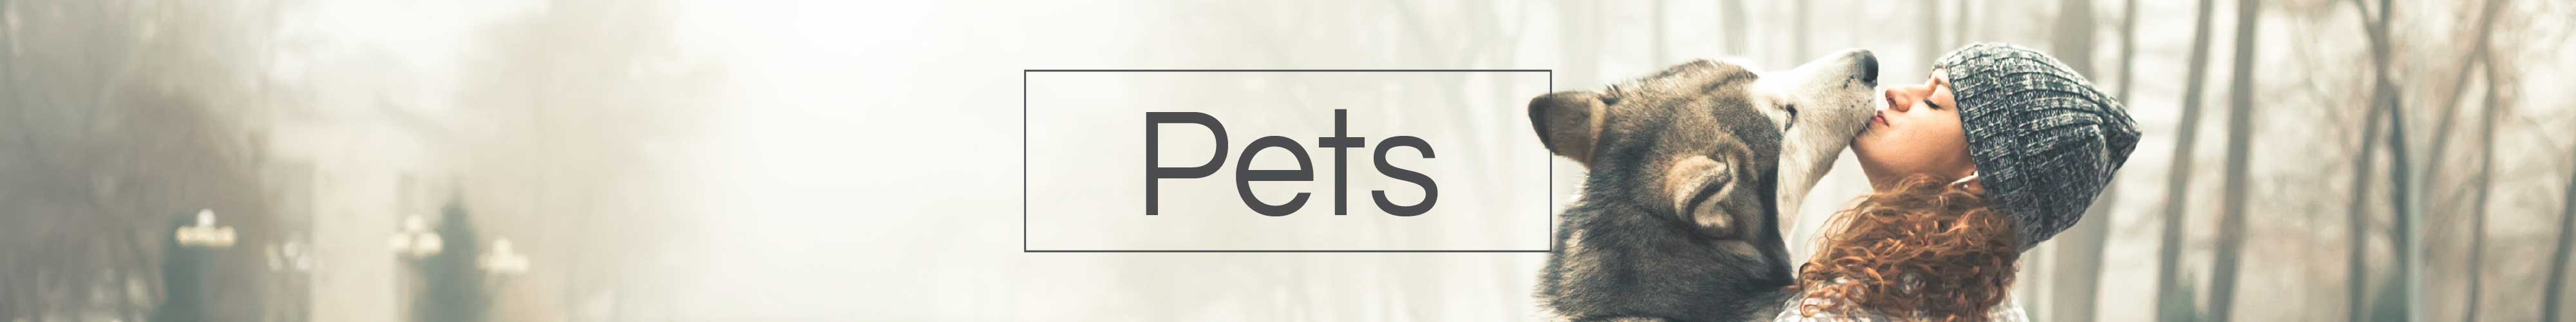 Personalized Pet Products - Dog Bowls